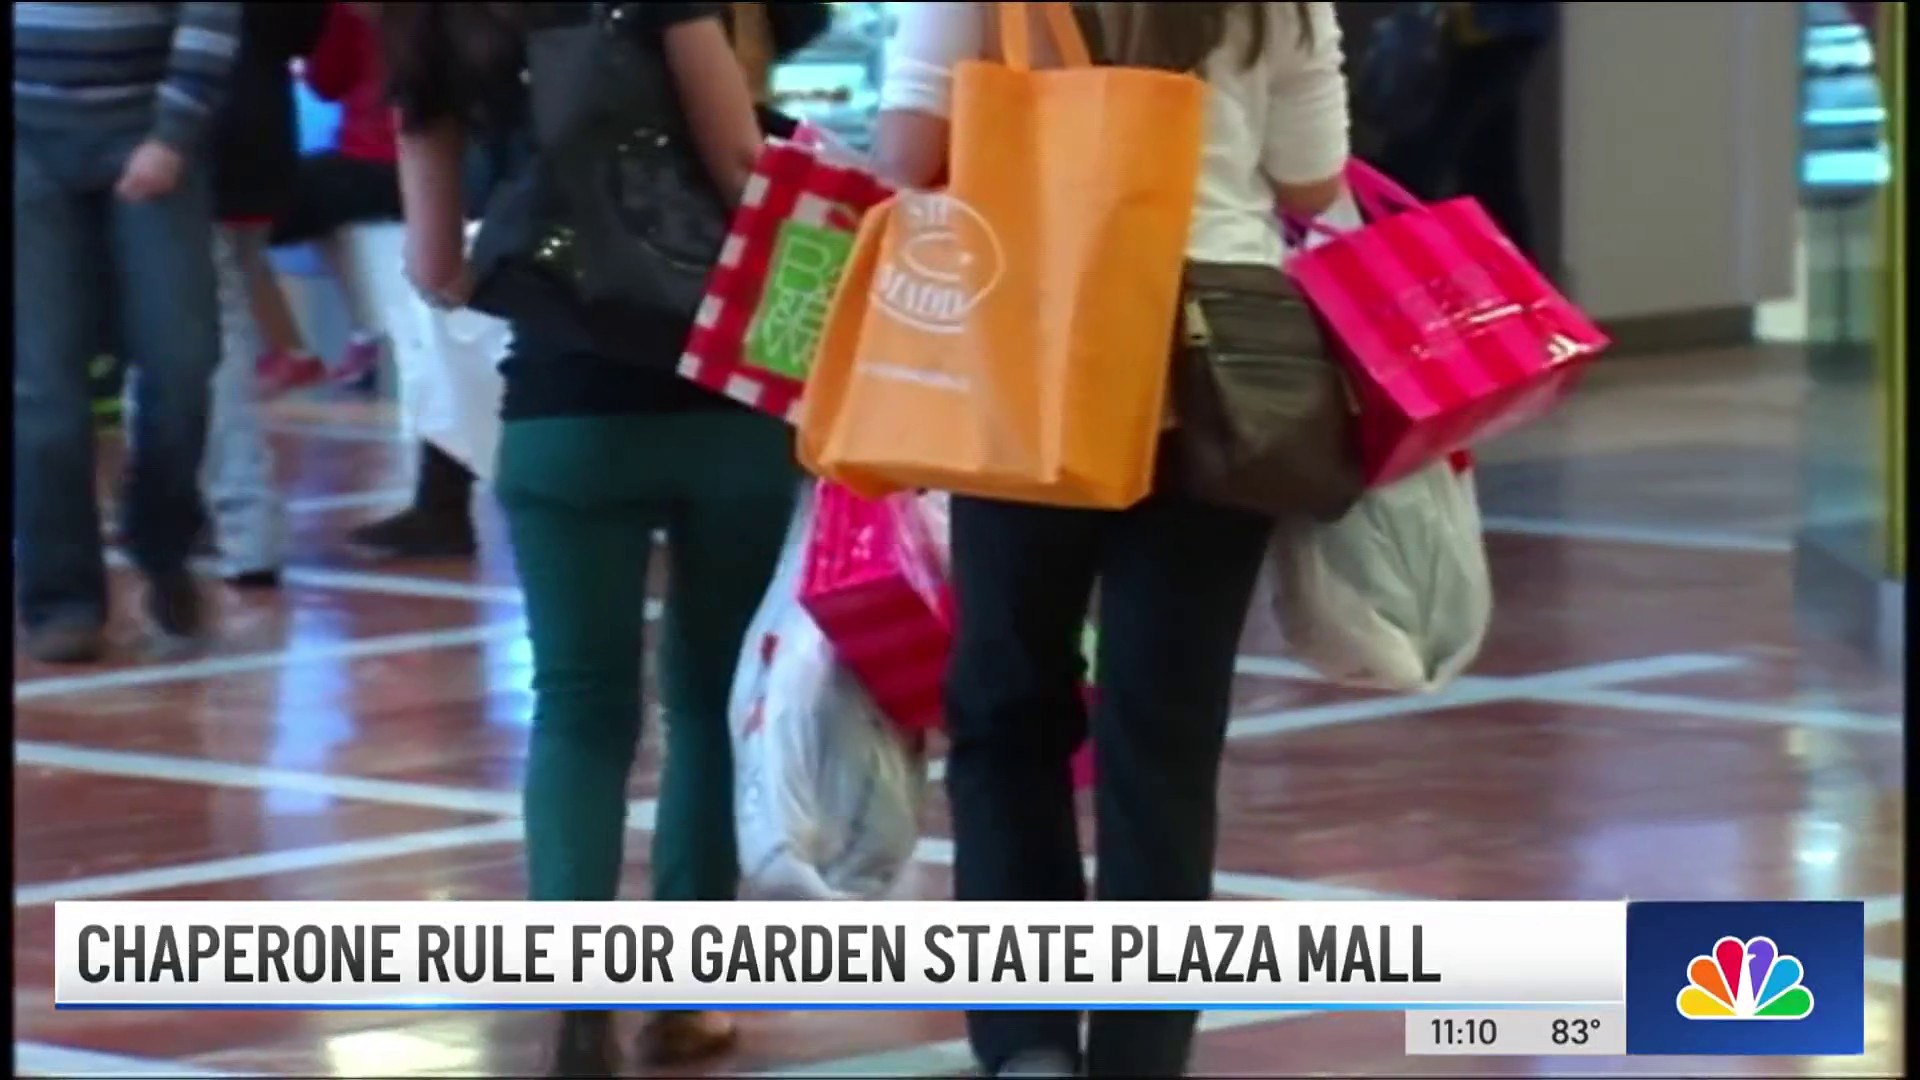 Garden State Plaza implements new chaperone policy